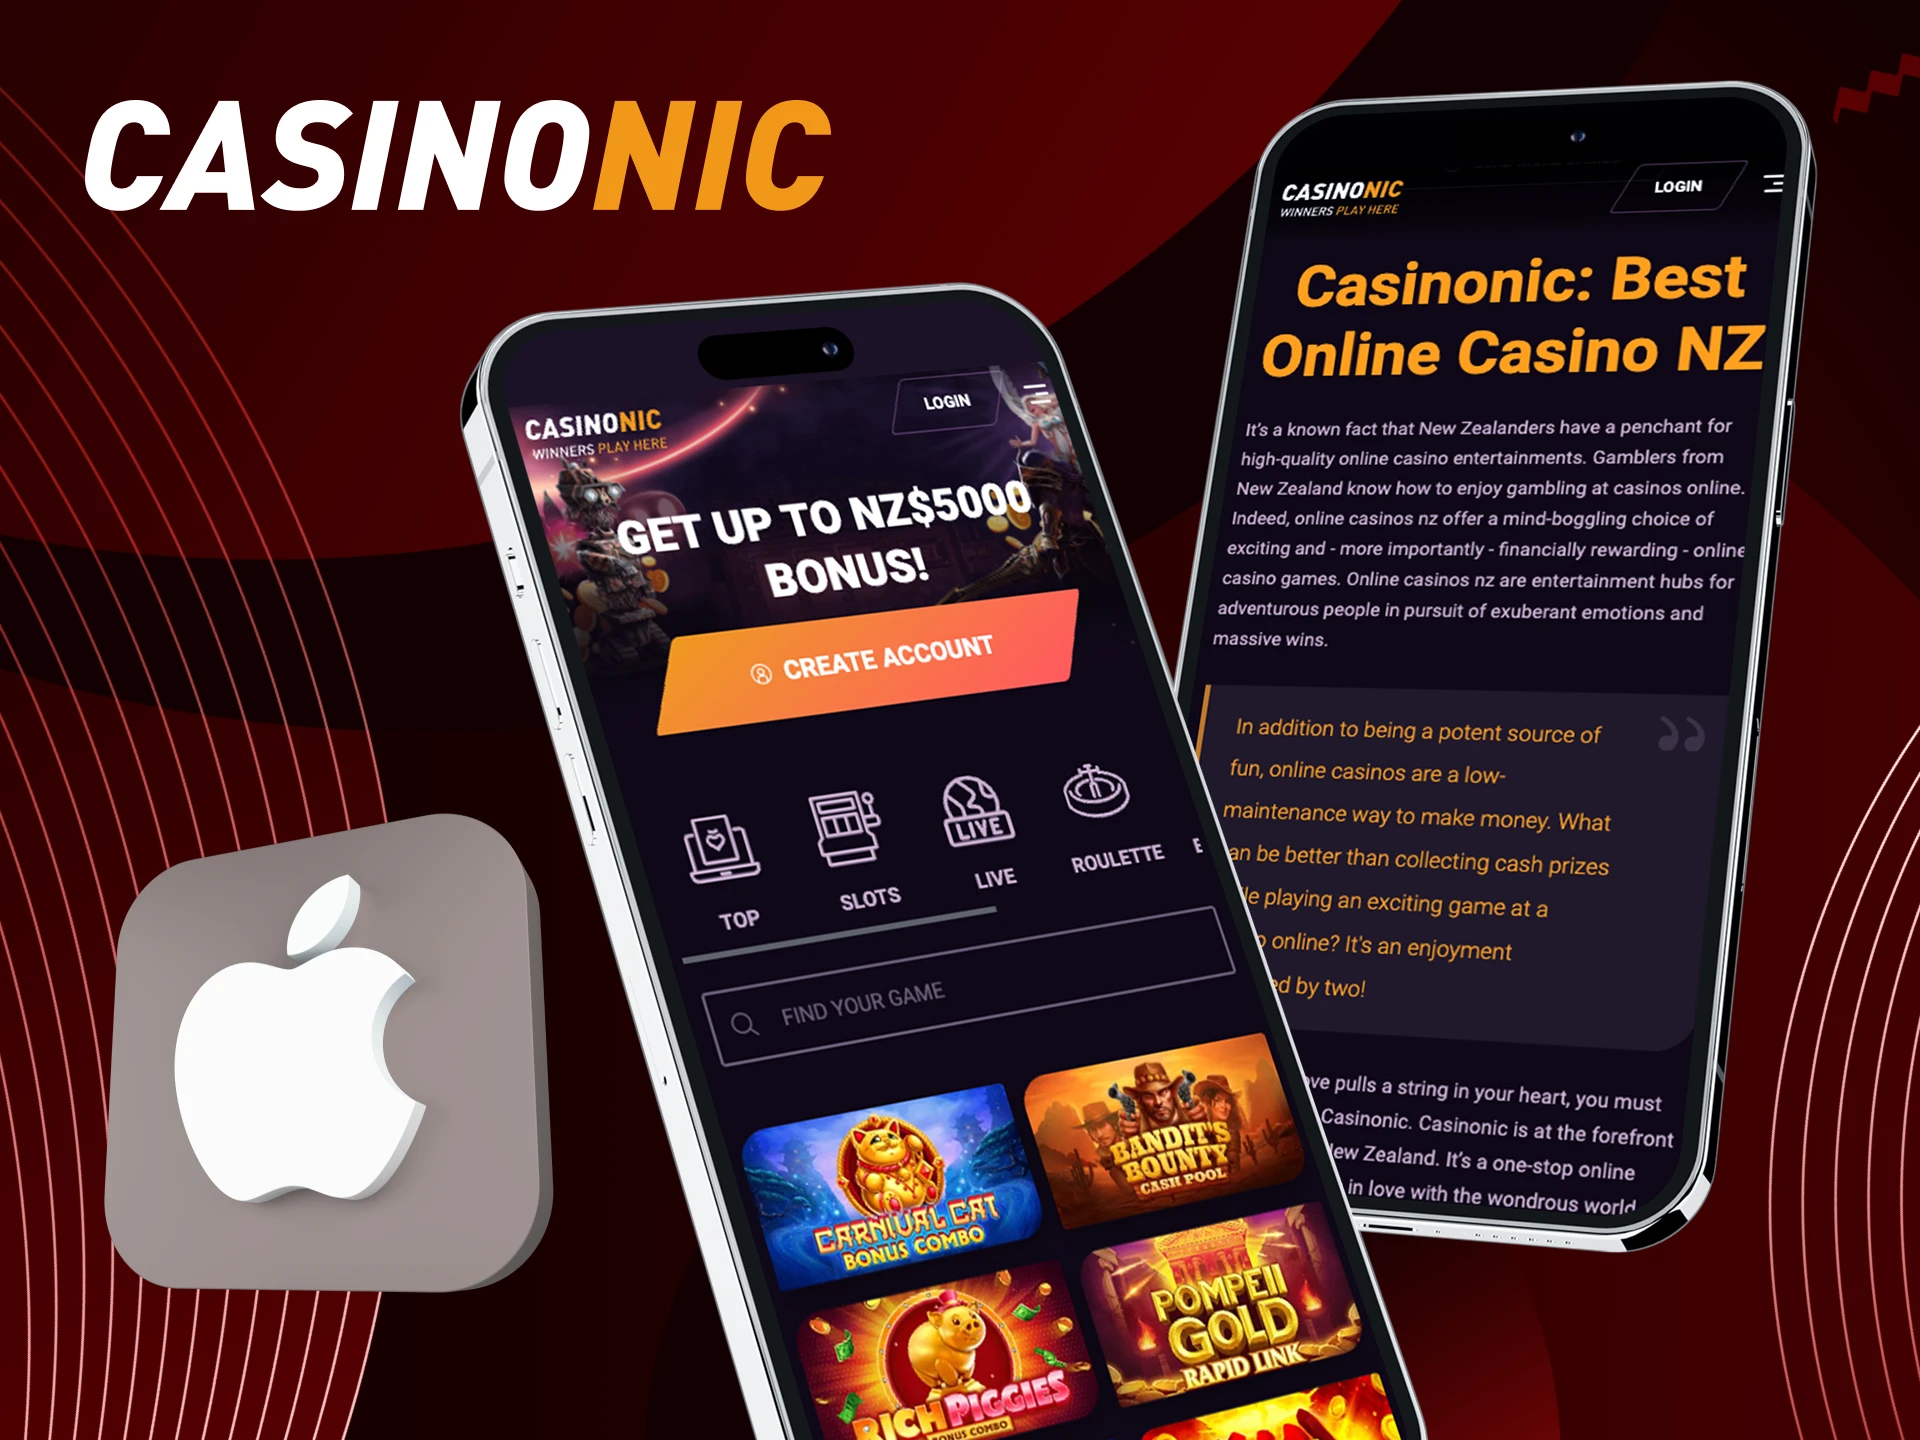 Instructions on how to download the CasinoNic online casino application for an iOS phone.